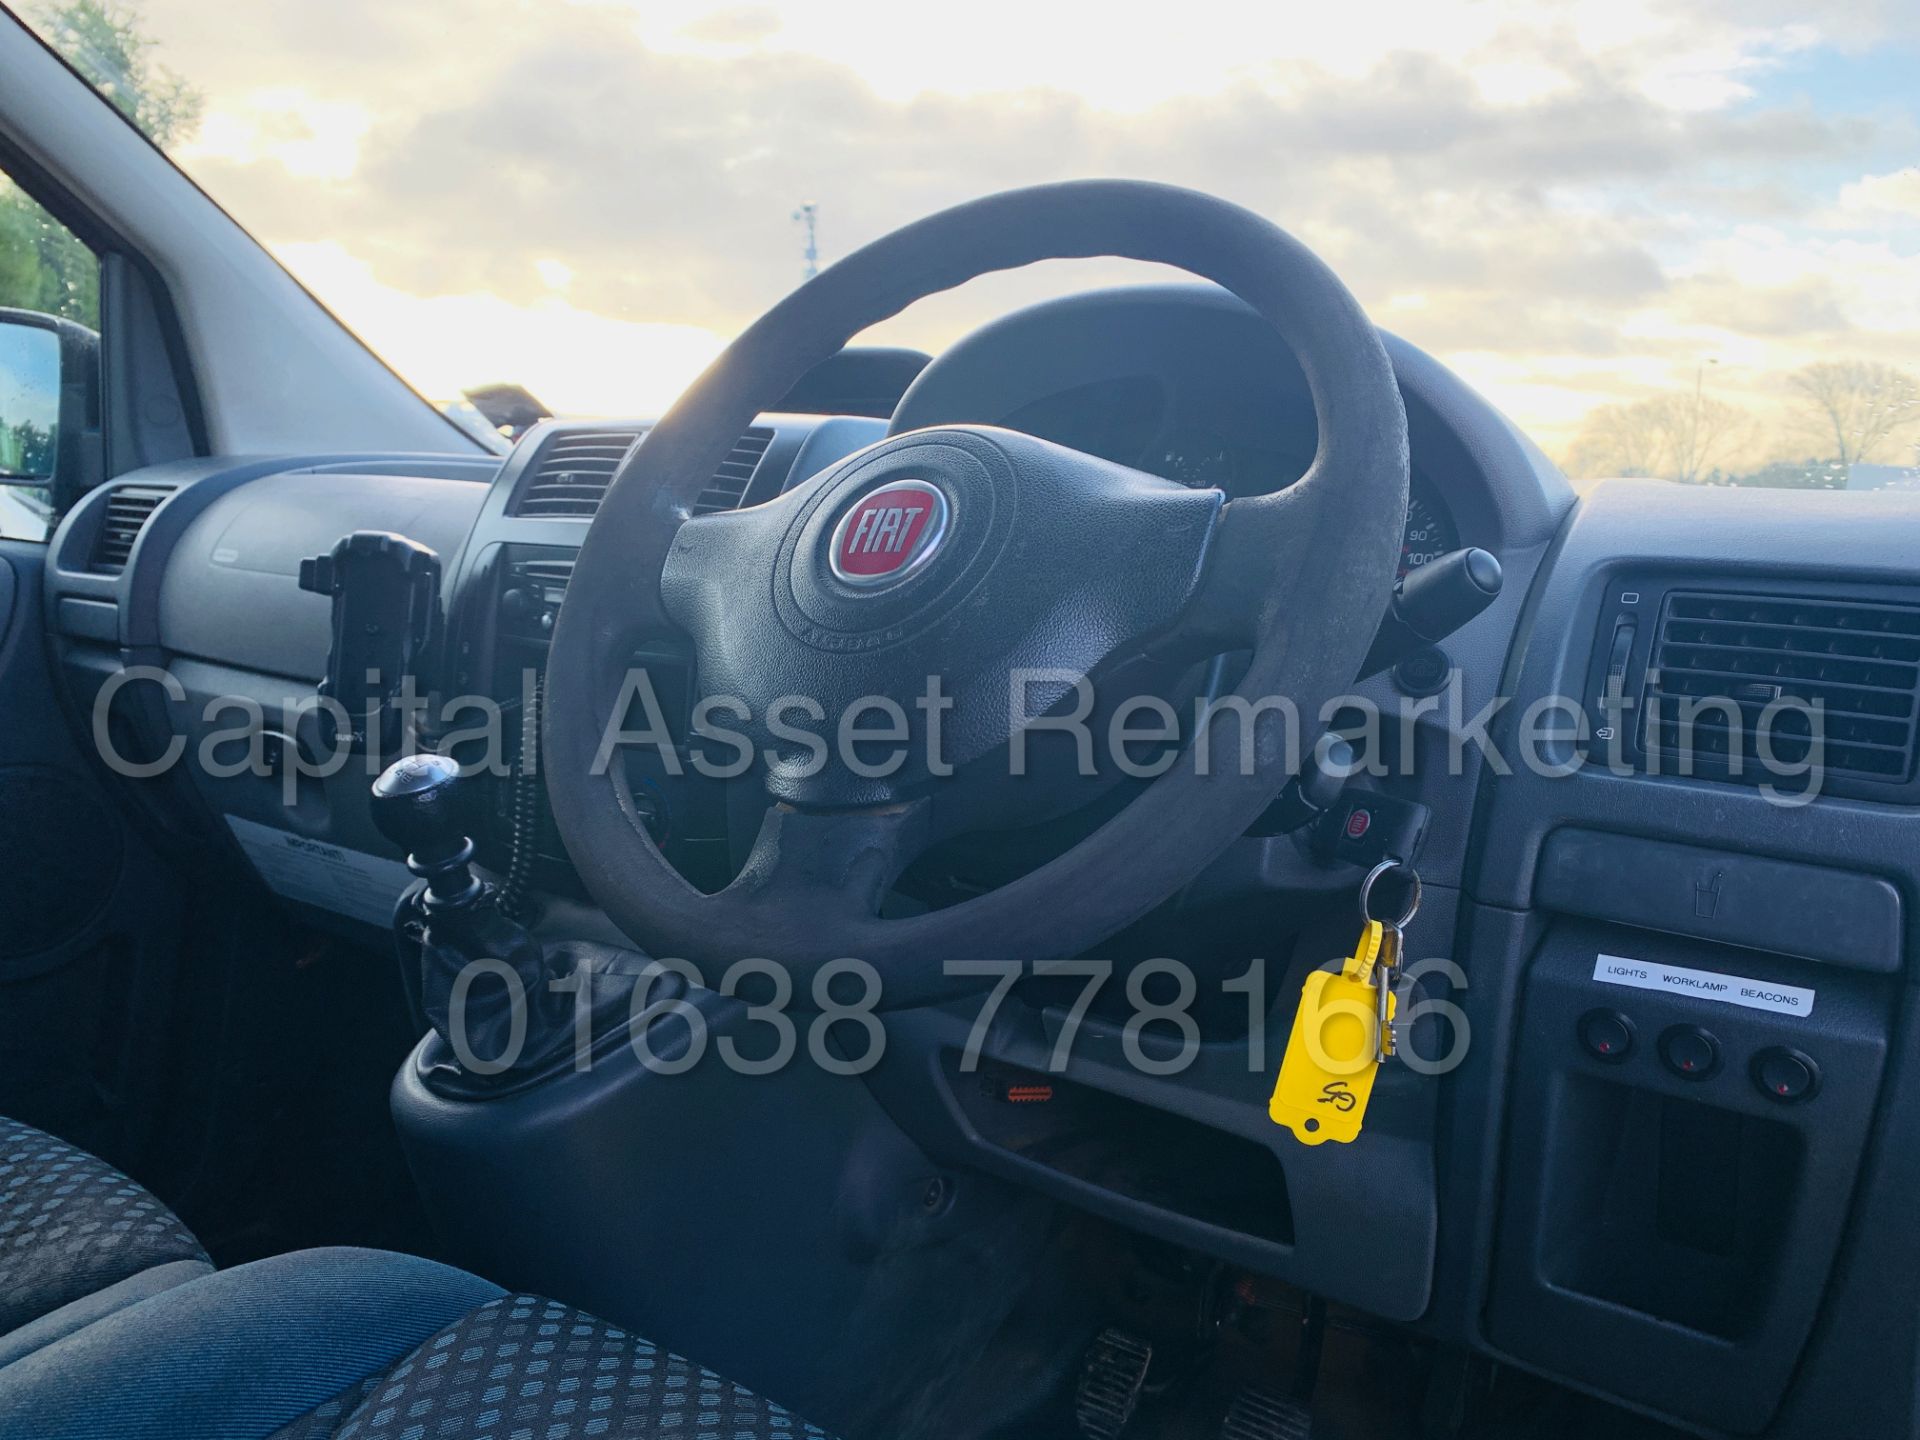 FIAT SCUDO *COMFORT EDITION* LWB (2012 MODEL) '2.0 DIESEL - 120 BHP - 6 SPEED' *AIR CON* (1 OWNER) - Image 29 of 37